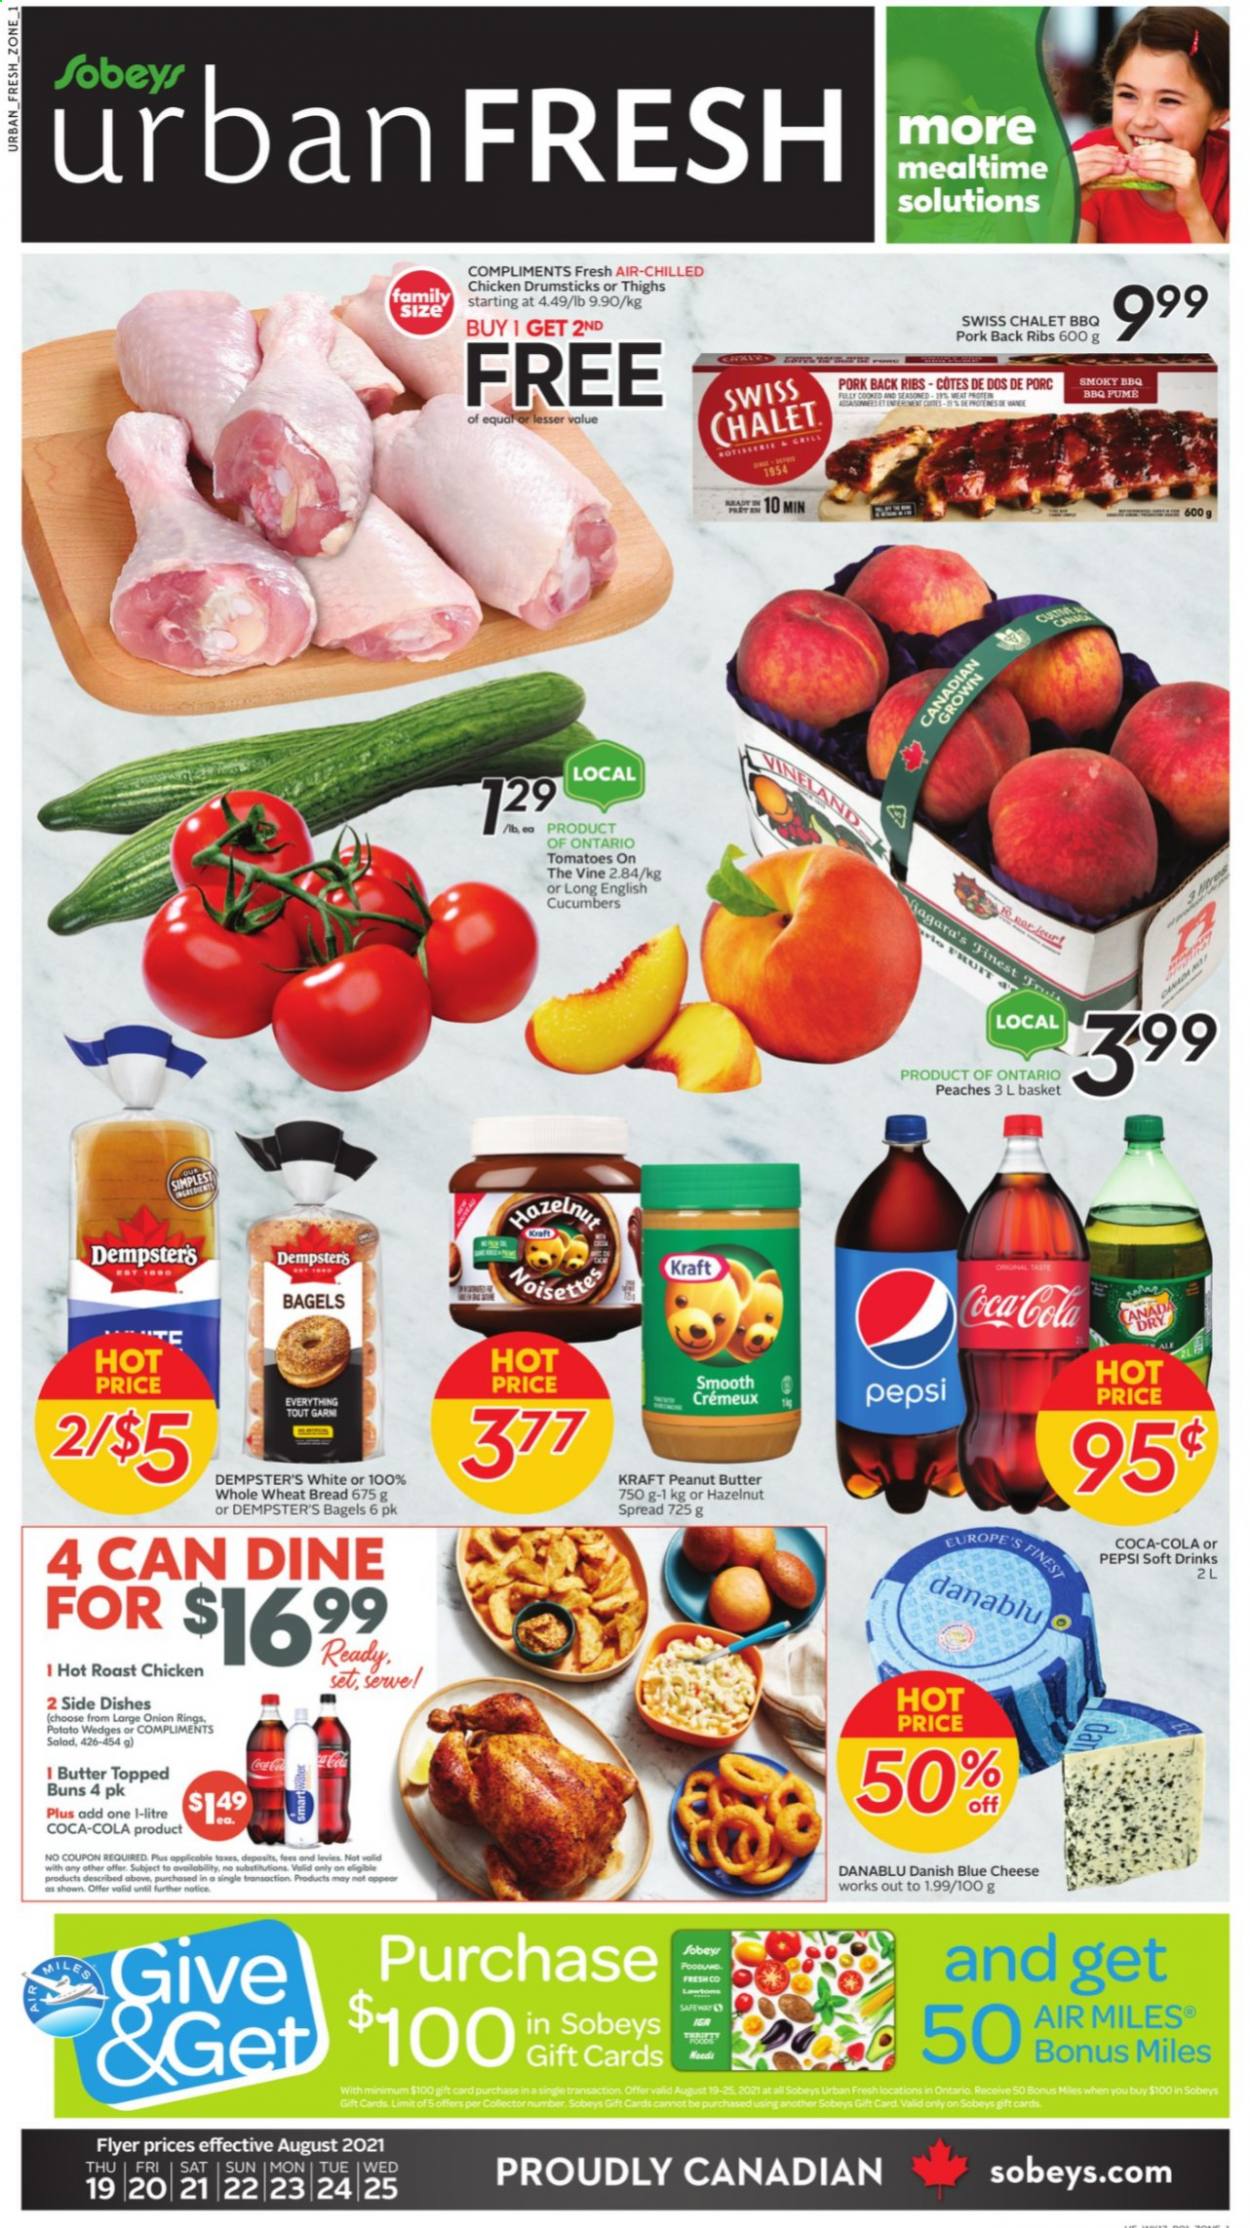 thumbnail - Sobeys Urban Fresh Flyer - August 19, 2021 - August 25, 2021 - Sales products - bagels, wheat bread, buns, cucumber, tomatoes, peaches, chicken roast, onion rings, Kraft®, blue cheese, cheese, potato wedges, peanut butter, hazelnut spread, Canada Dry, Coca-Cola, Pepsi, soft drink, chicken drumsticks, chicken, pork meat, pork ribs, pork back ribs. Page 1.